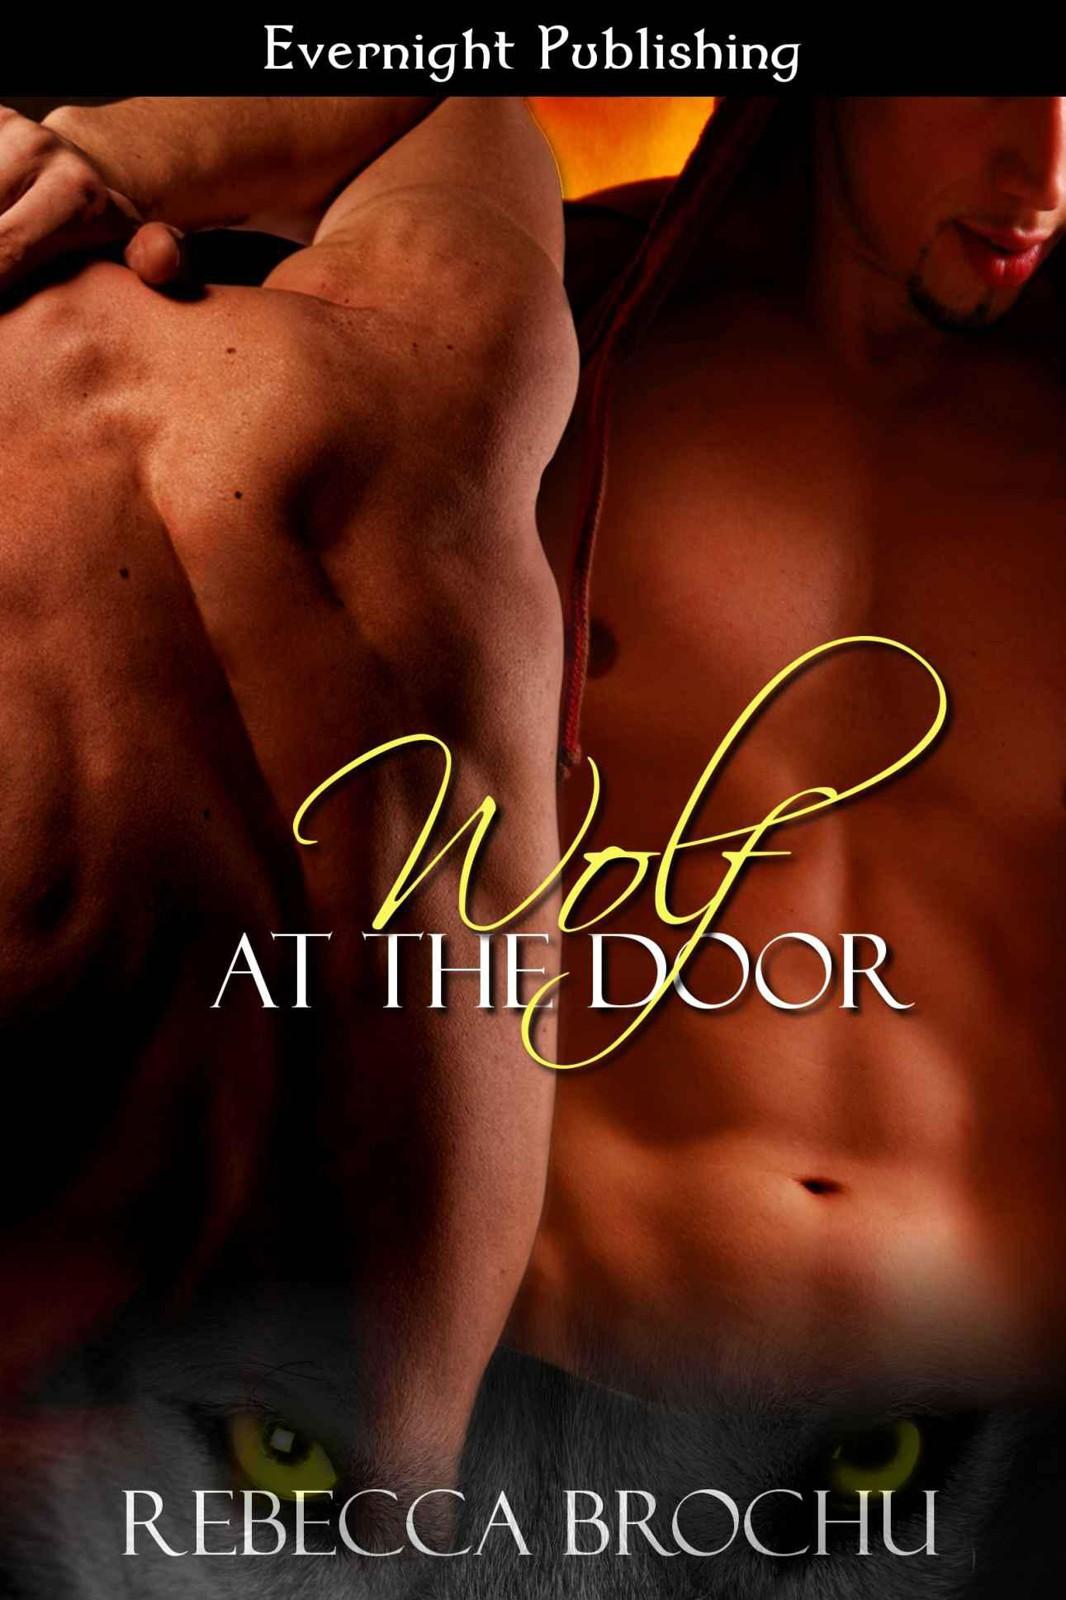 Wolf at the Door by Rebecca Brochu